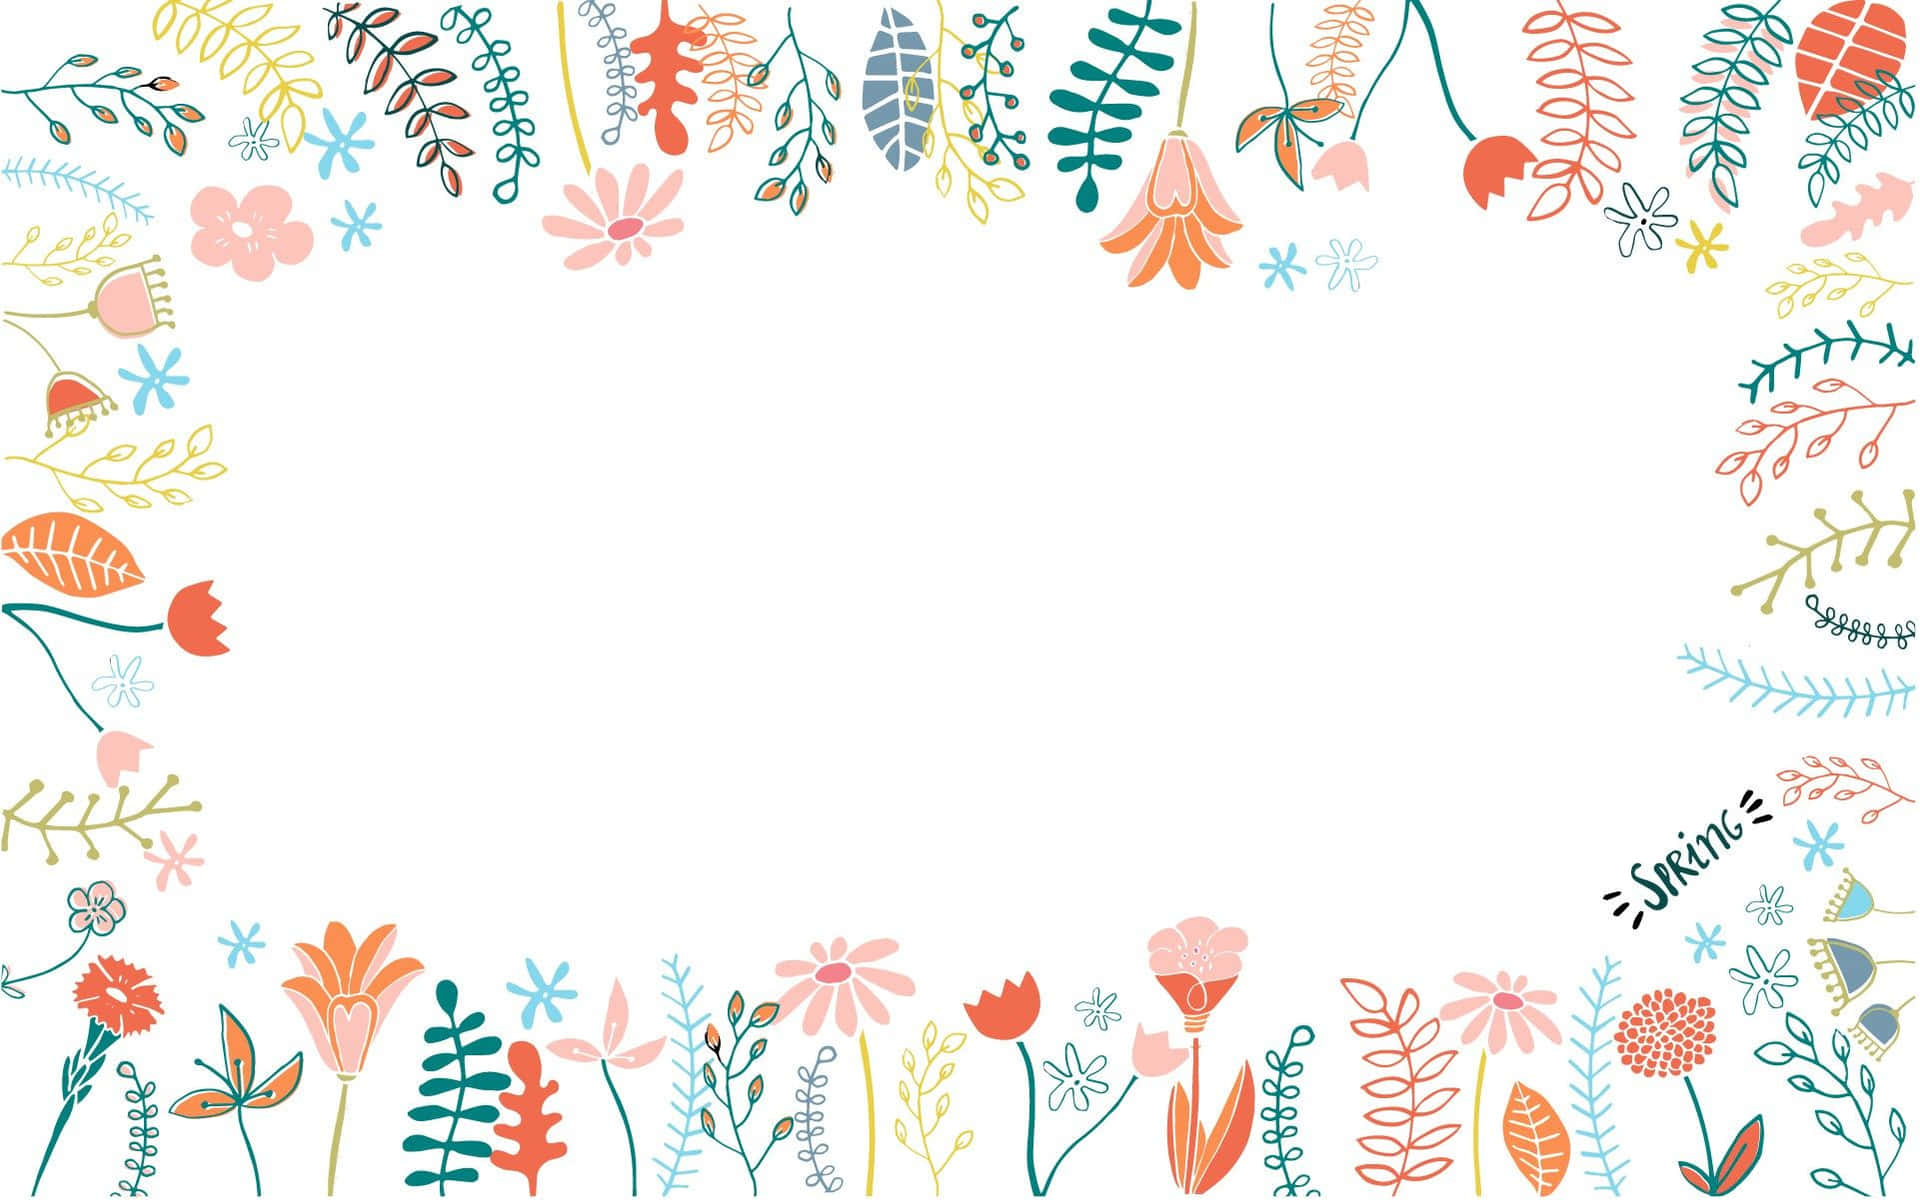 Bright and vibrant floral watercolor background.